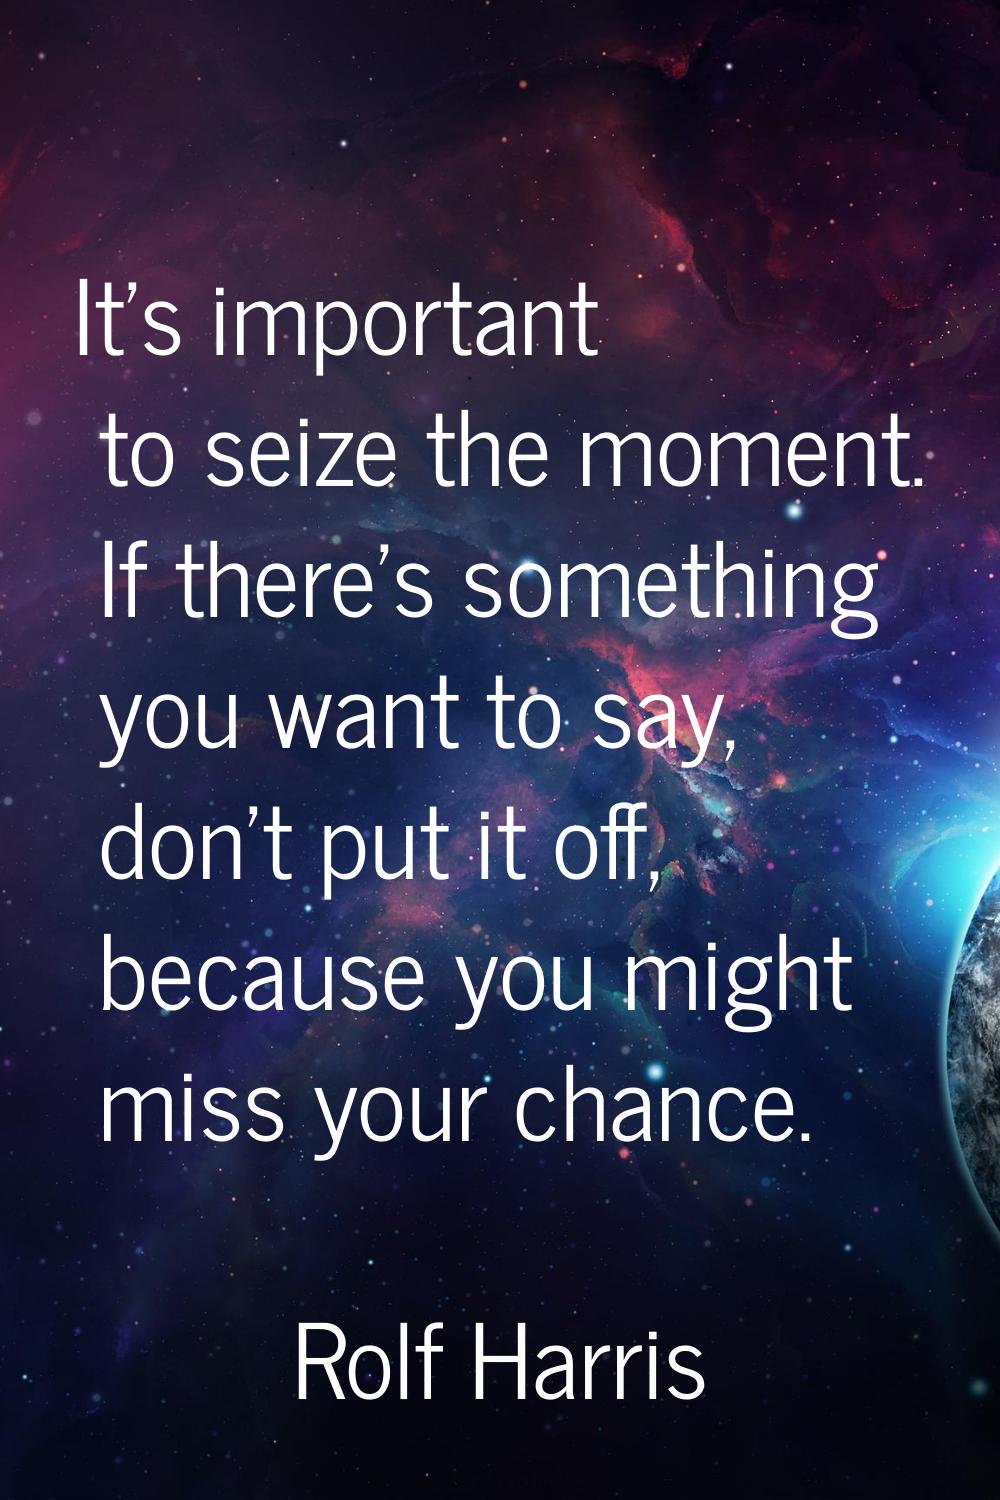 It's important to seize the moment. If there's something you want to say, don't put it off, because